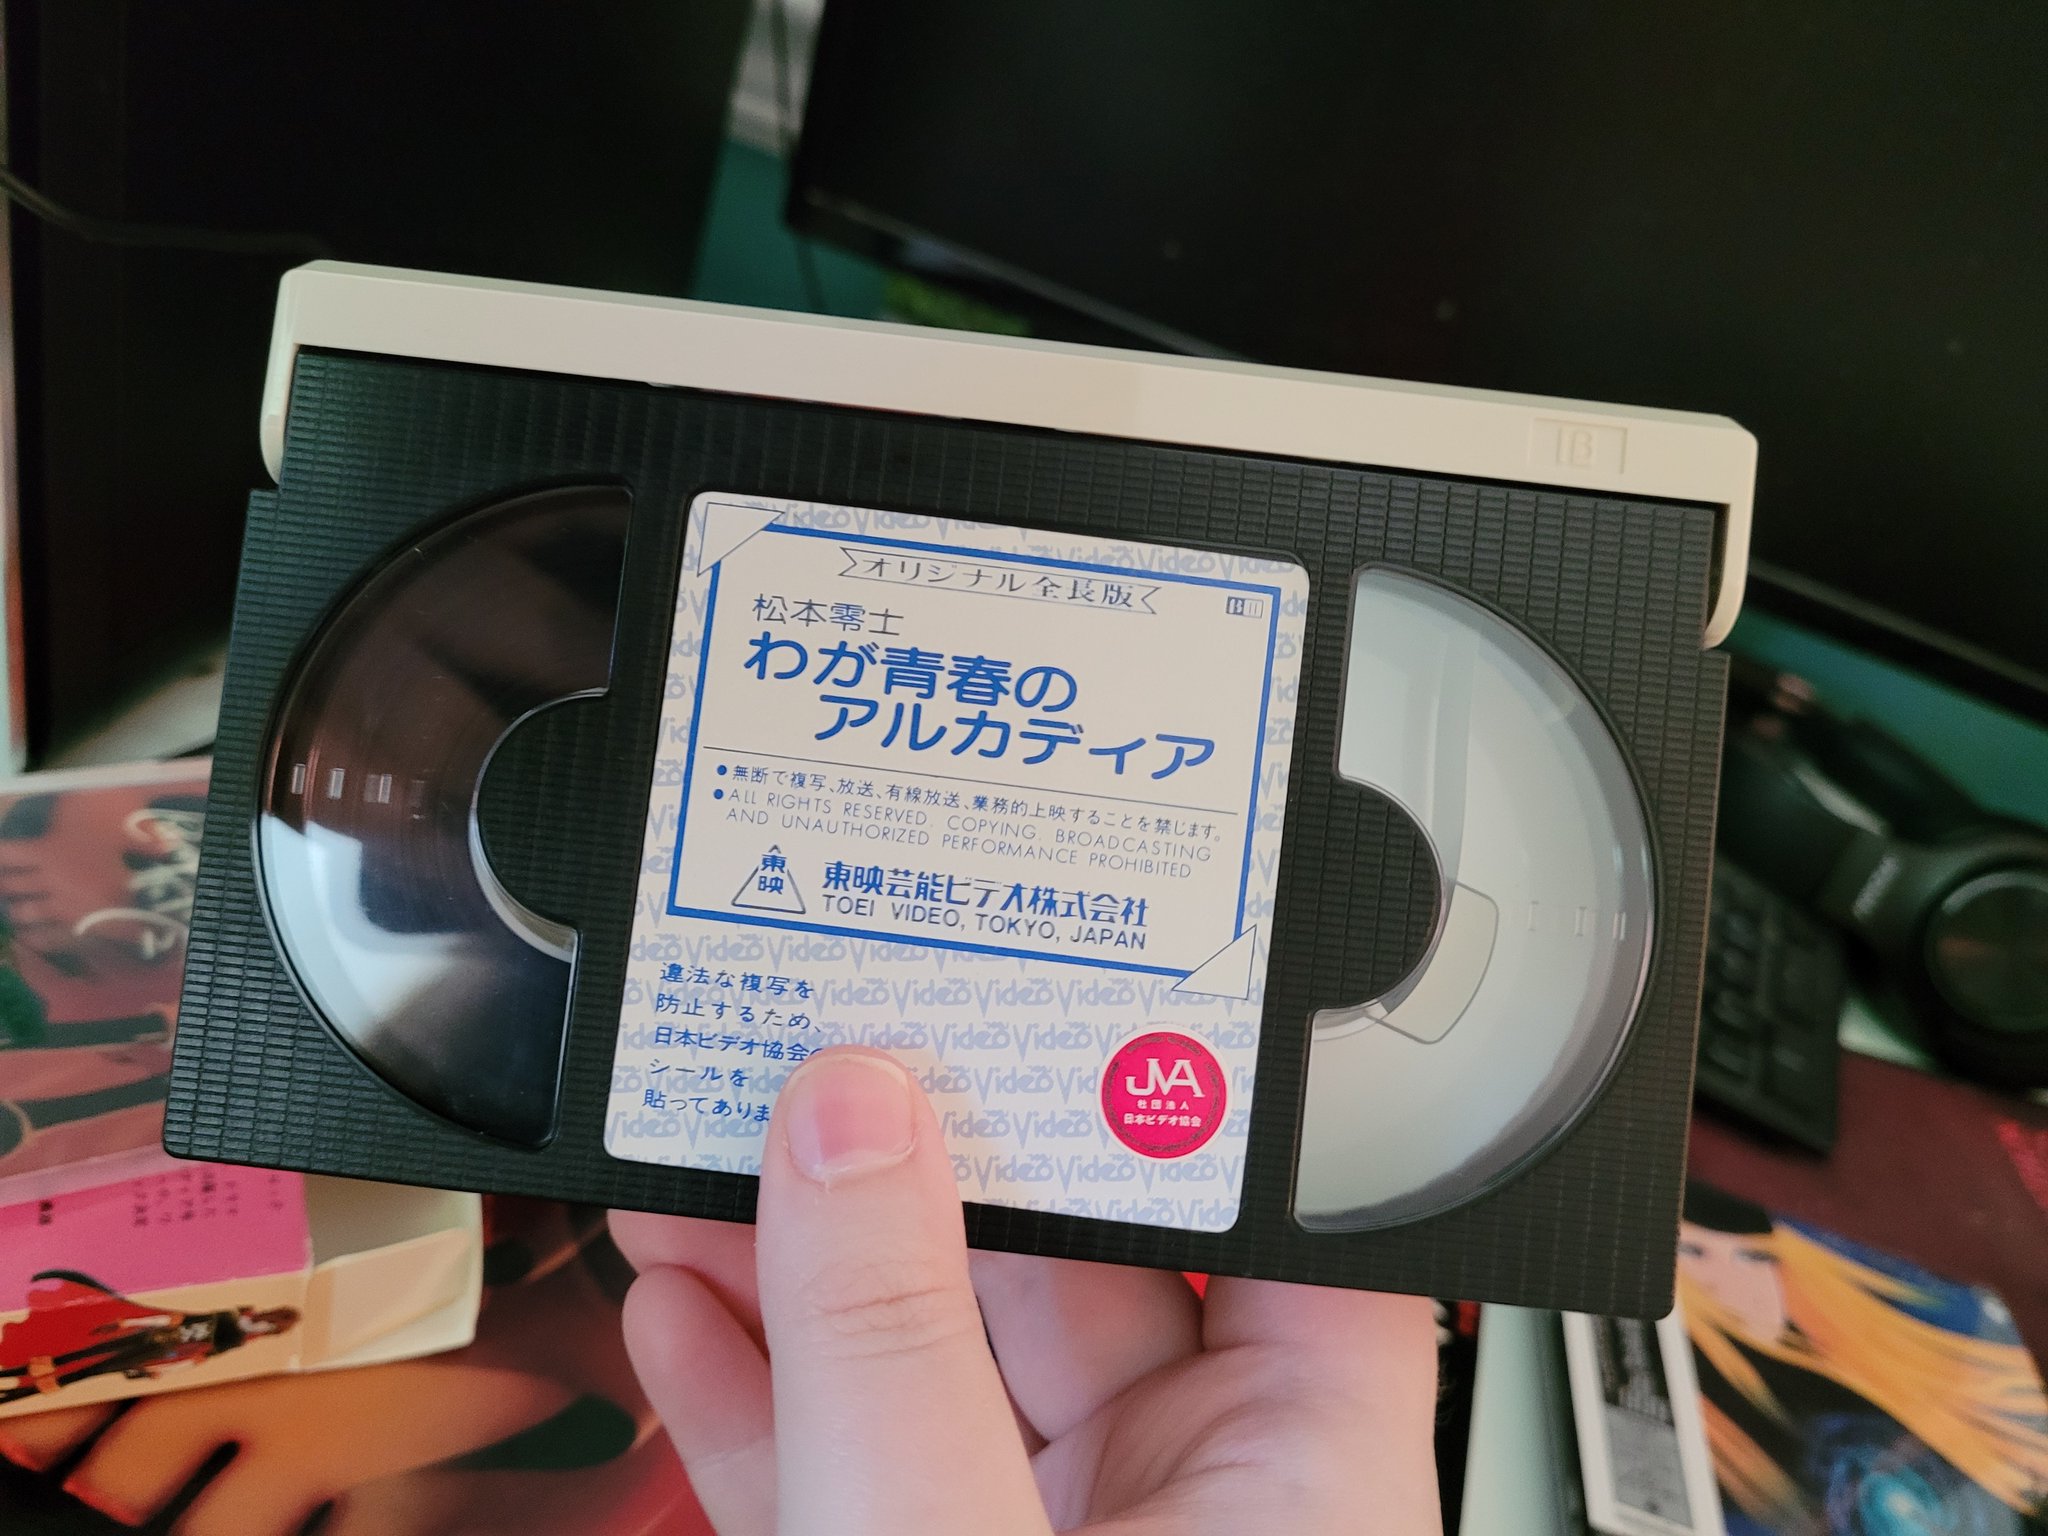 A look at the betamax tape